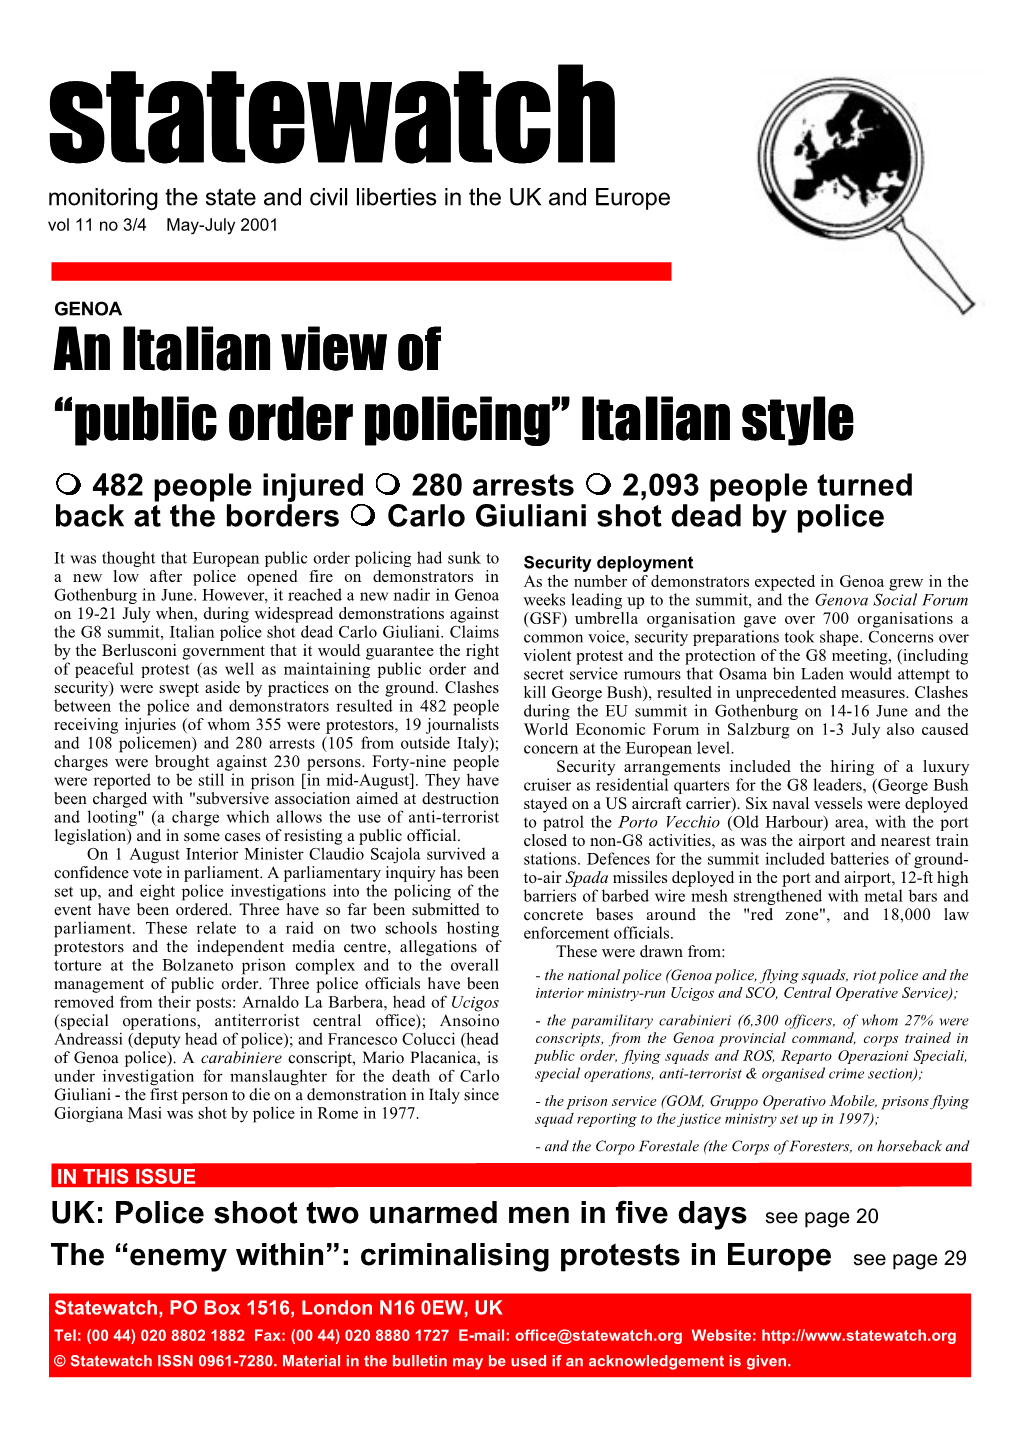 Public Order Policing” Italitalianian Style M 482 People Injured M 280 Arrests M 2,093 People Turned Back at the Borders M Carlo Giuliani Shot Dead by Police